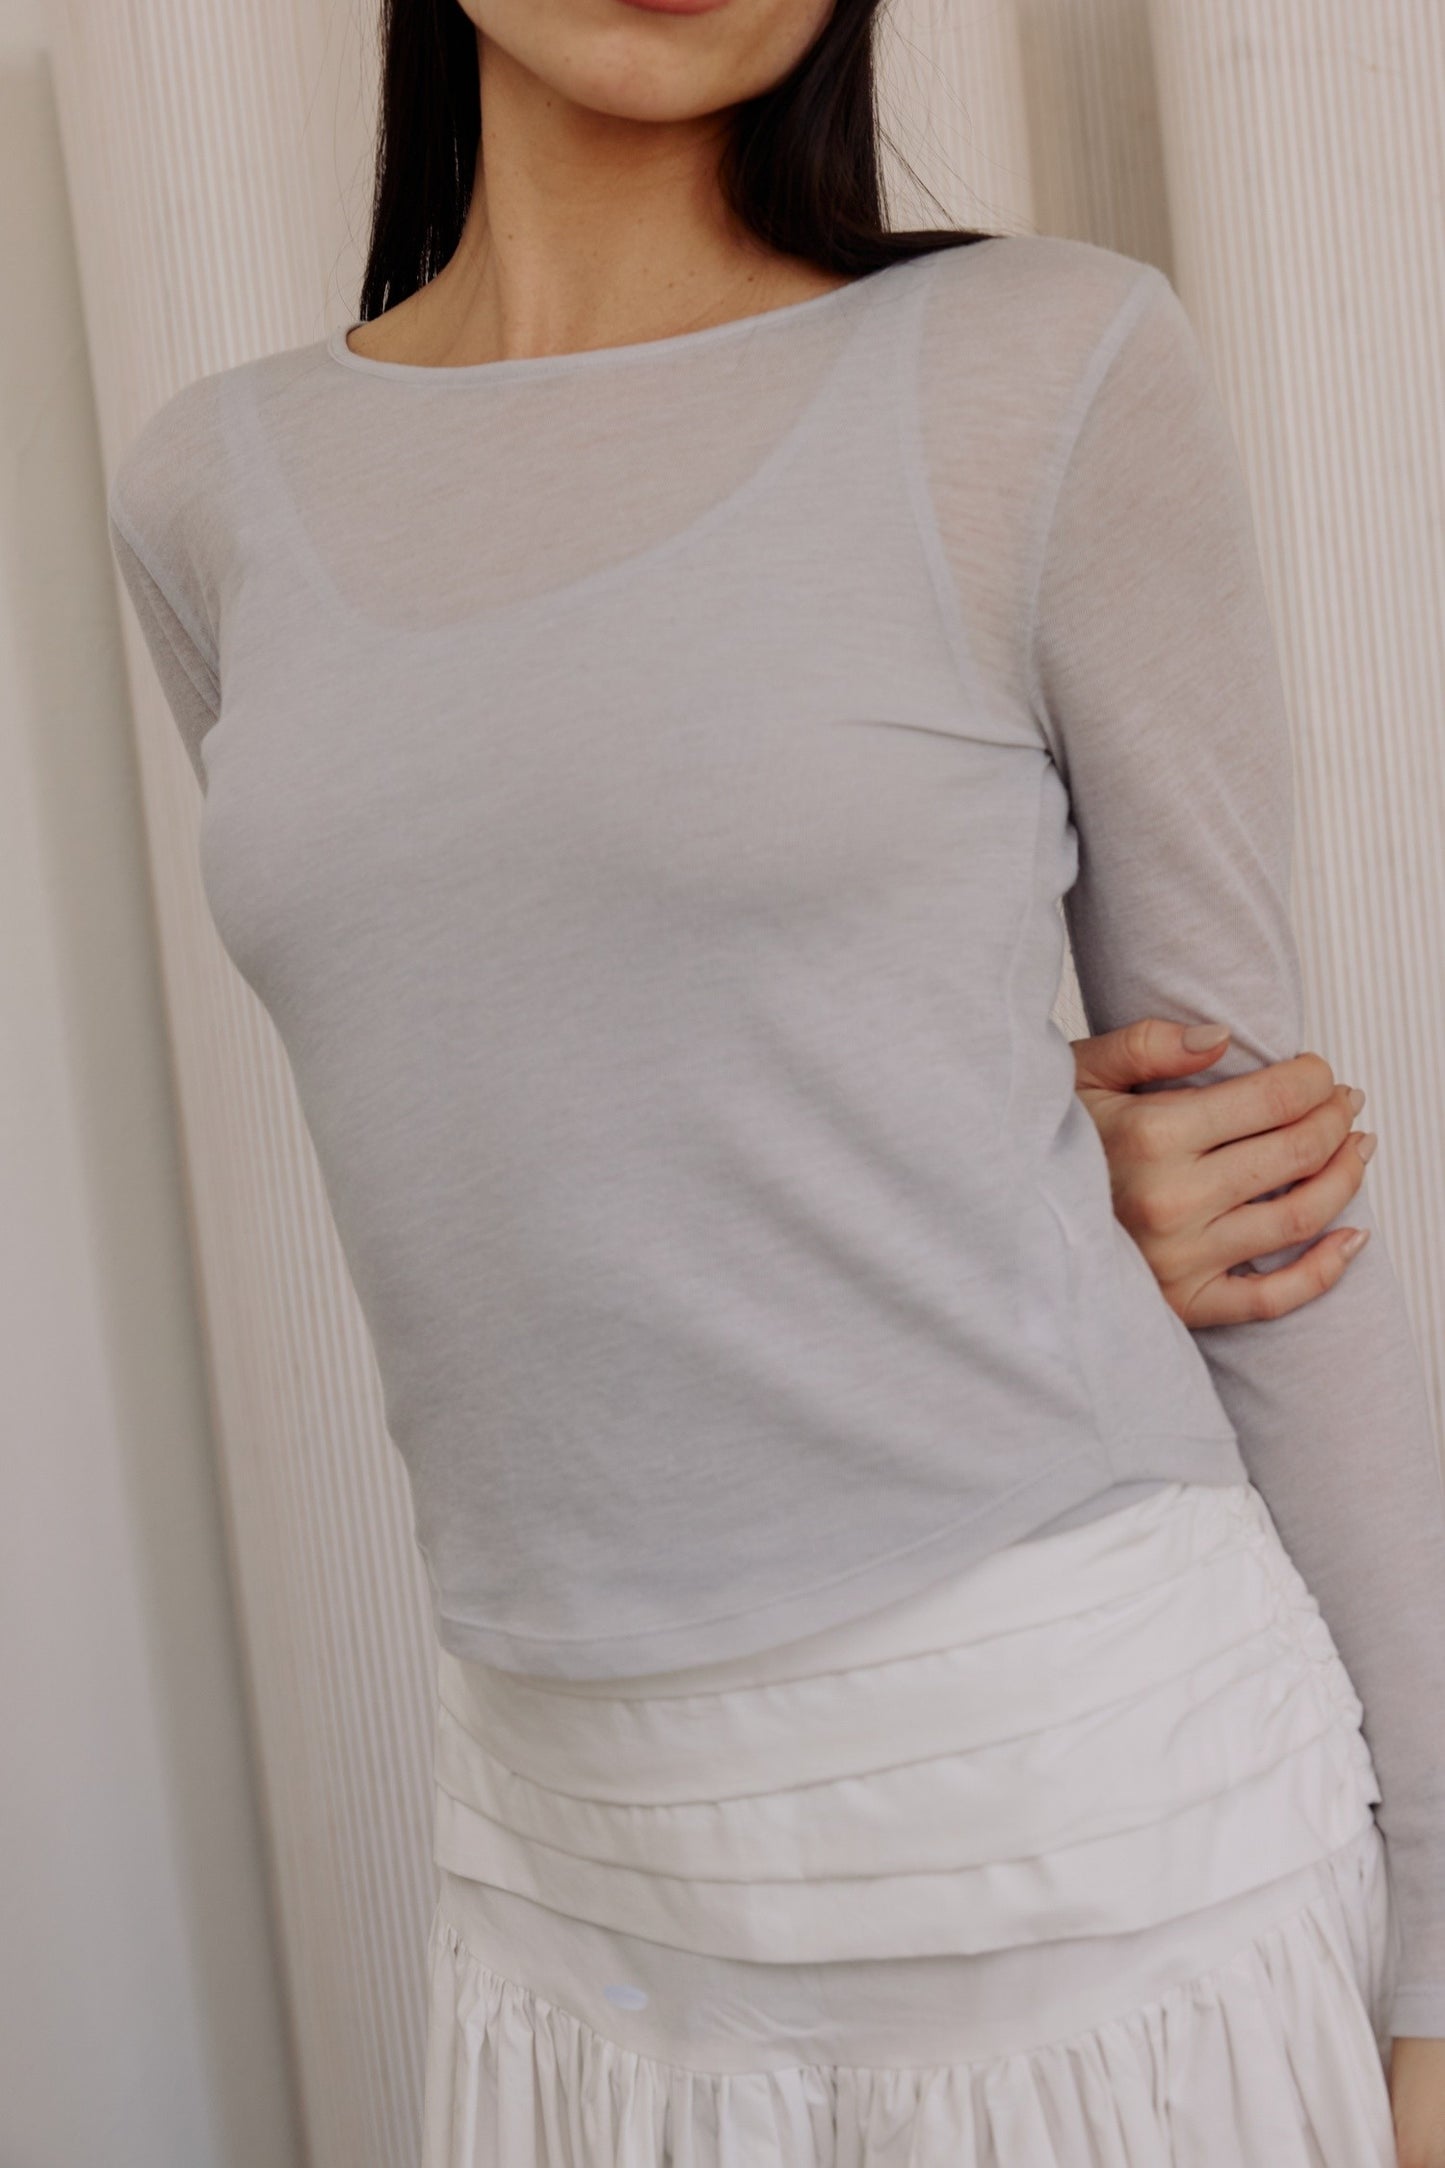 LIGHT WEIGHT SHEER CREW NECK WITH A SCOOP NECK TANK TOP